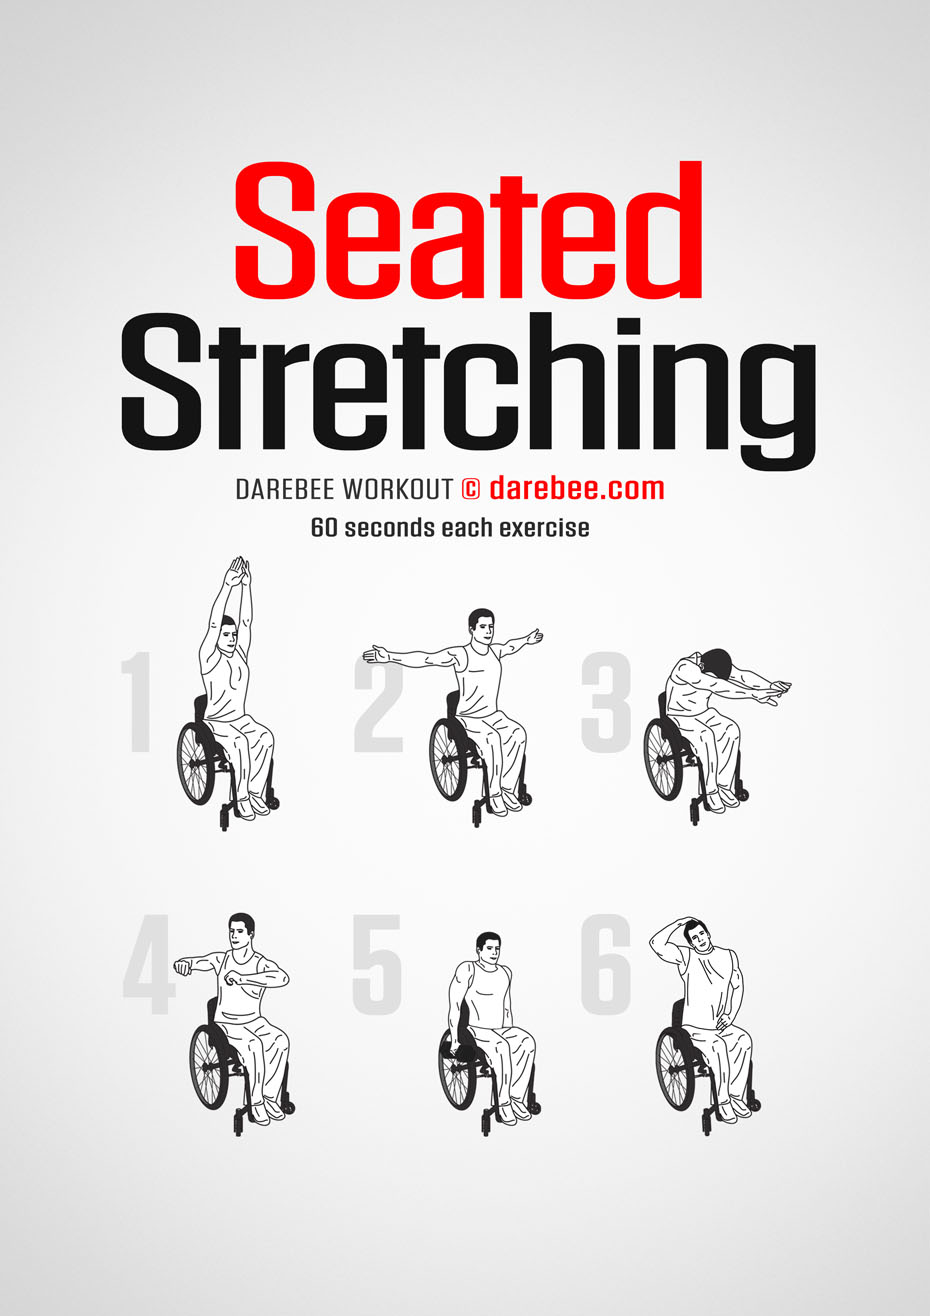 Seated Stretching is a Darebee home fitness upper body workout that helps you develop agility, range of motion and aids in the development of the cardiovascular system, all from a seated position.